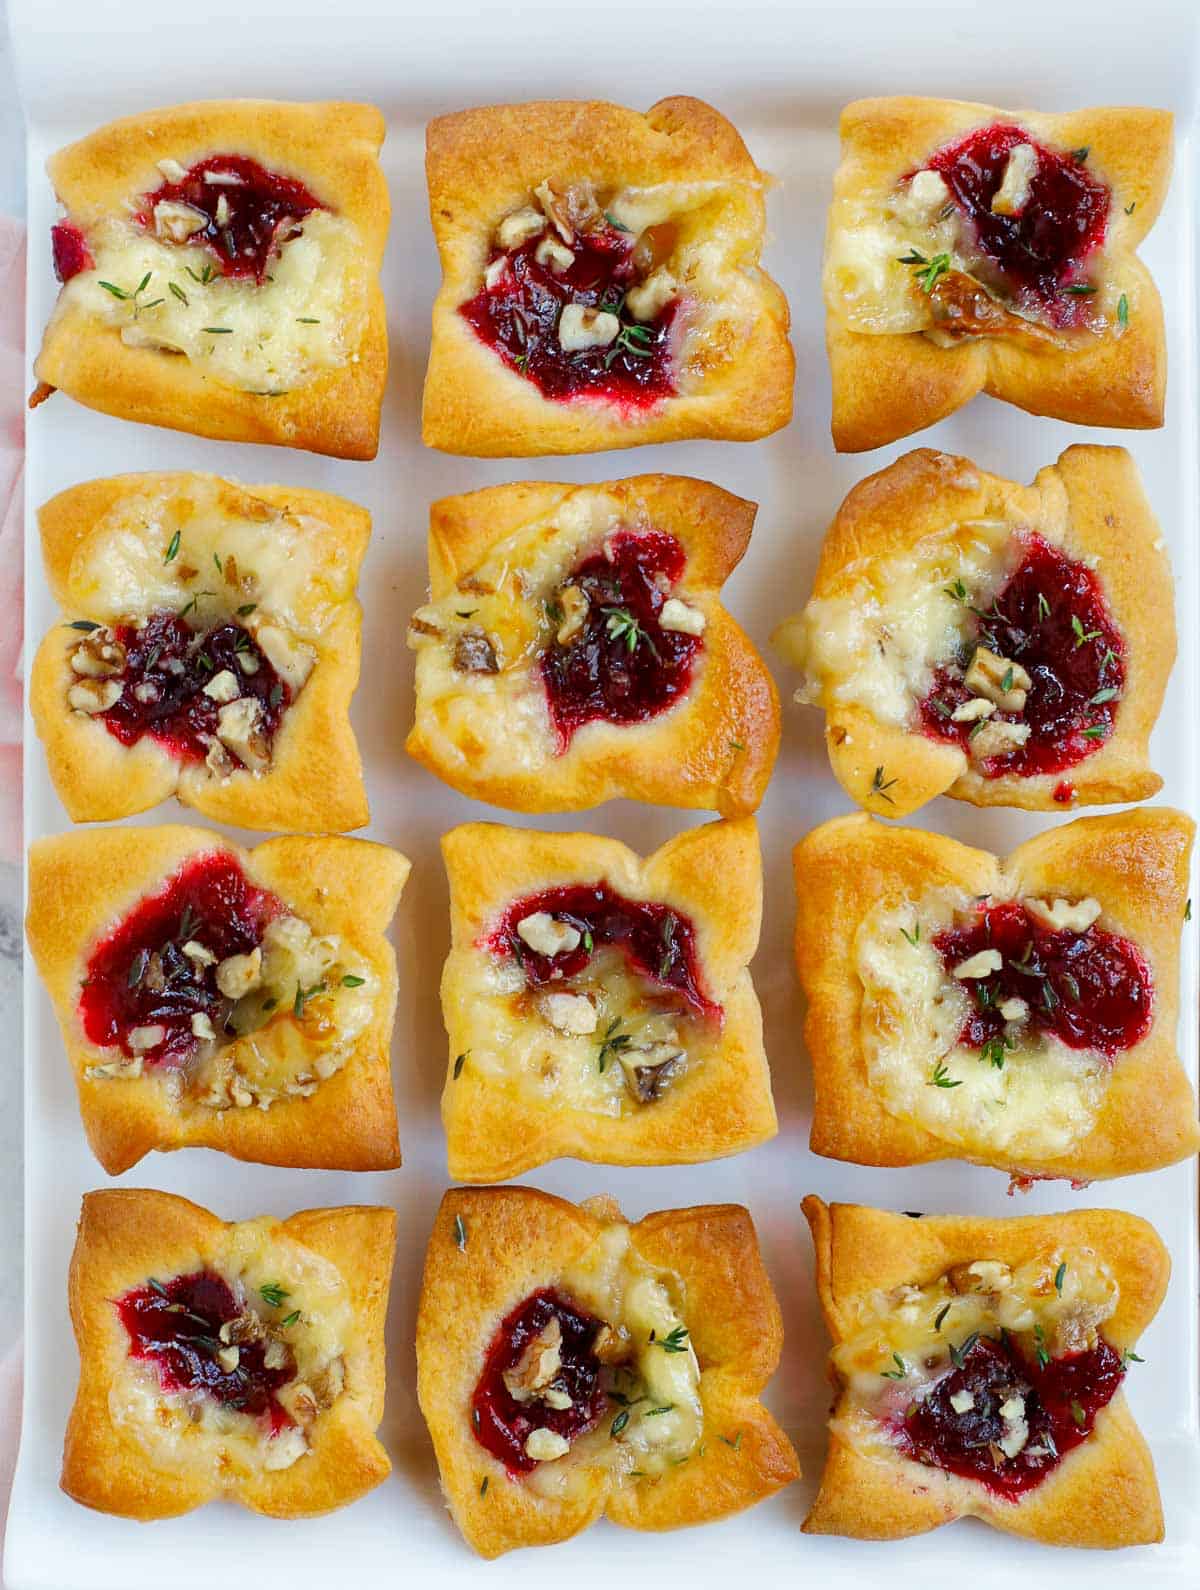 Baked brie bites served on a plate.